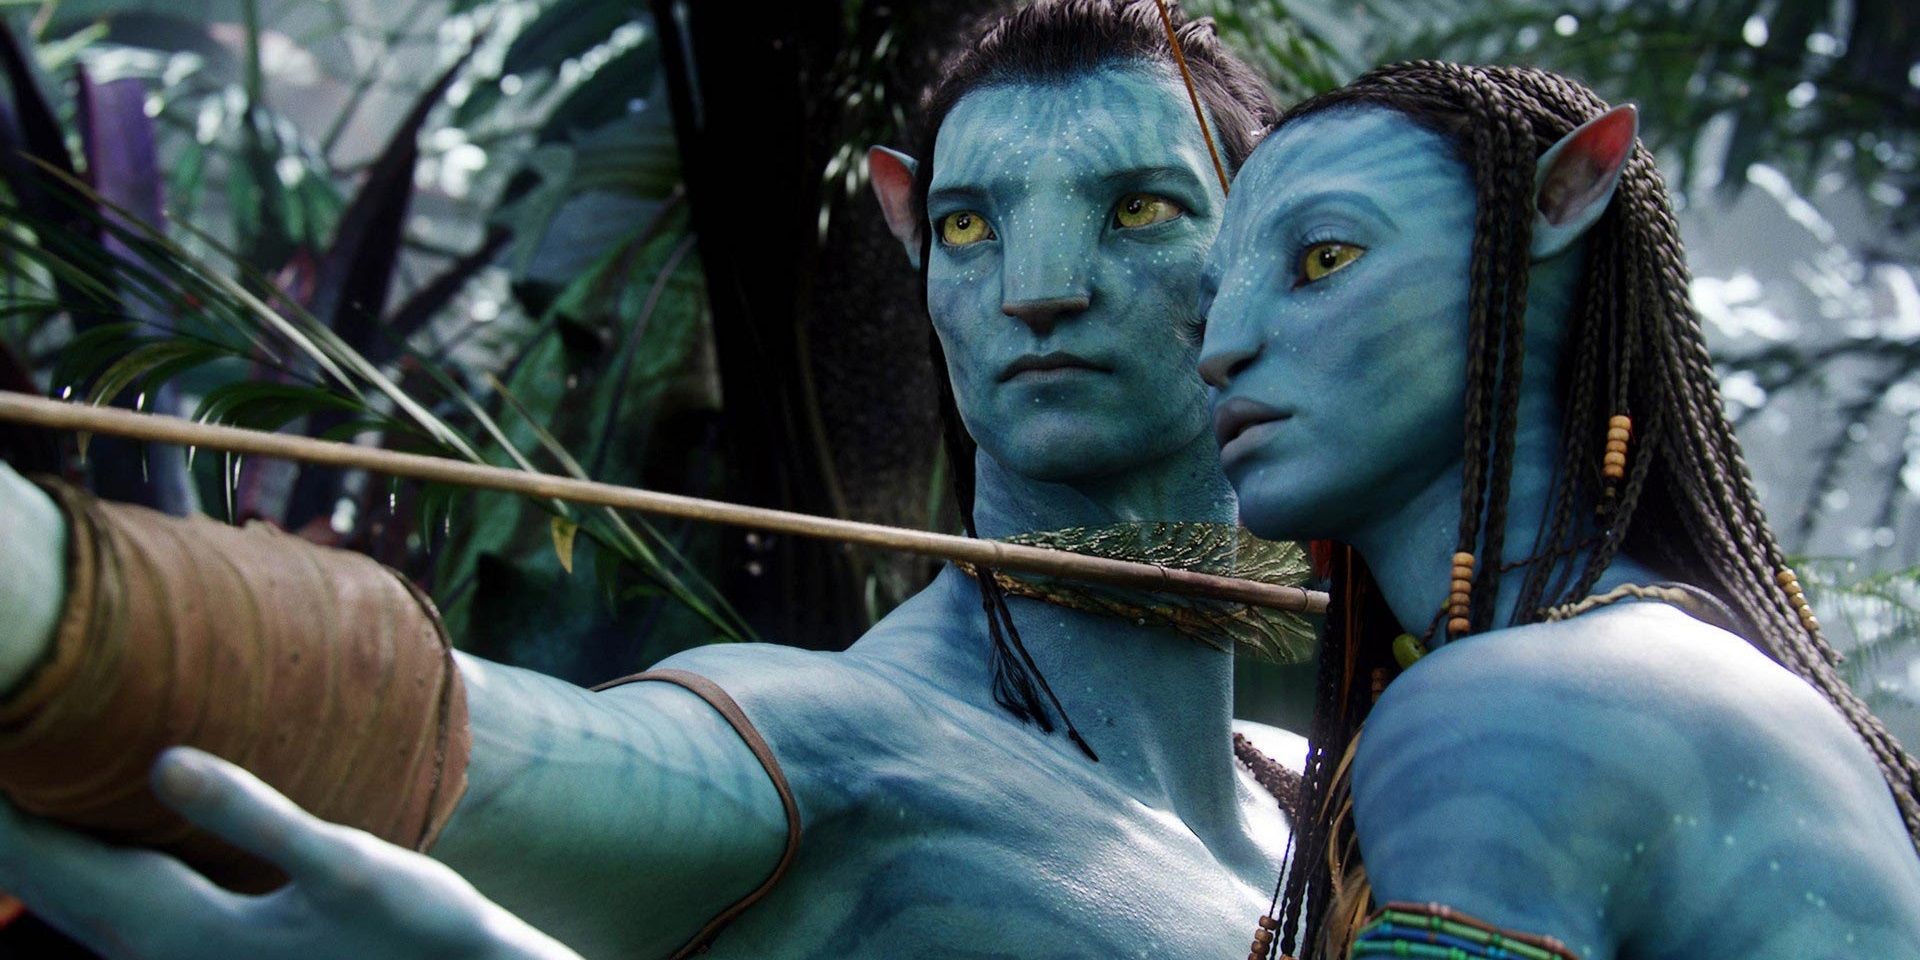 Jake and Neytiri with a bow and arrow in Avatar